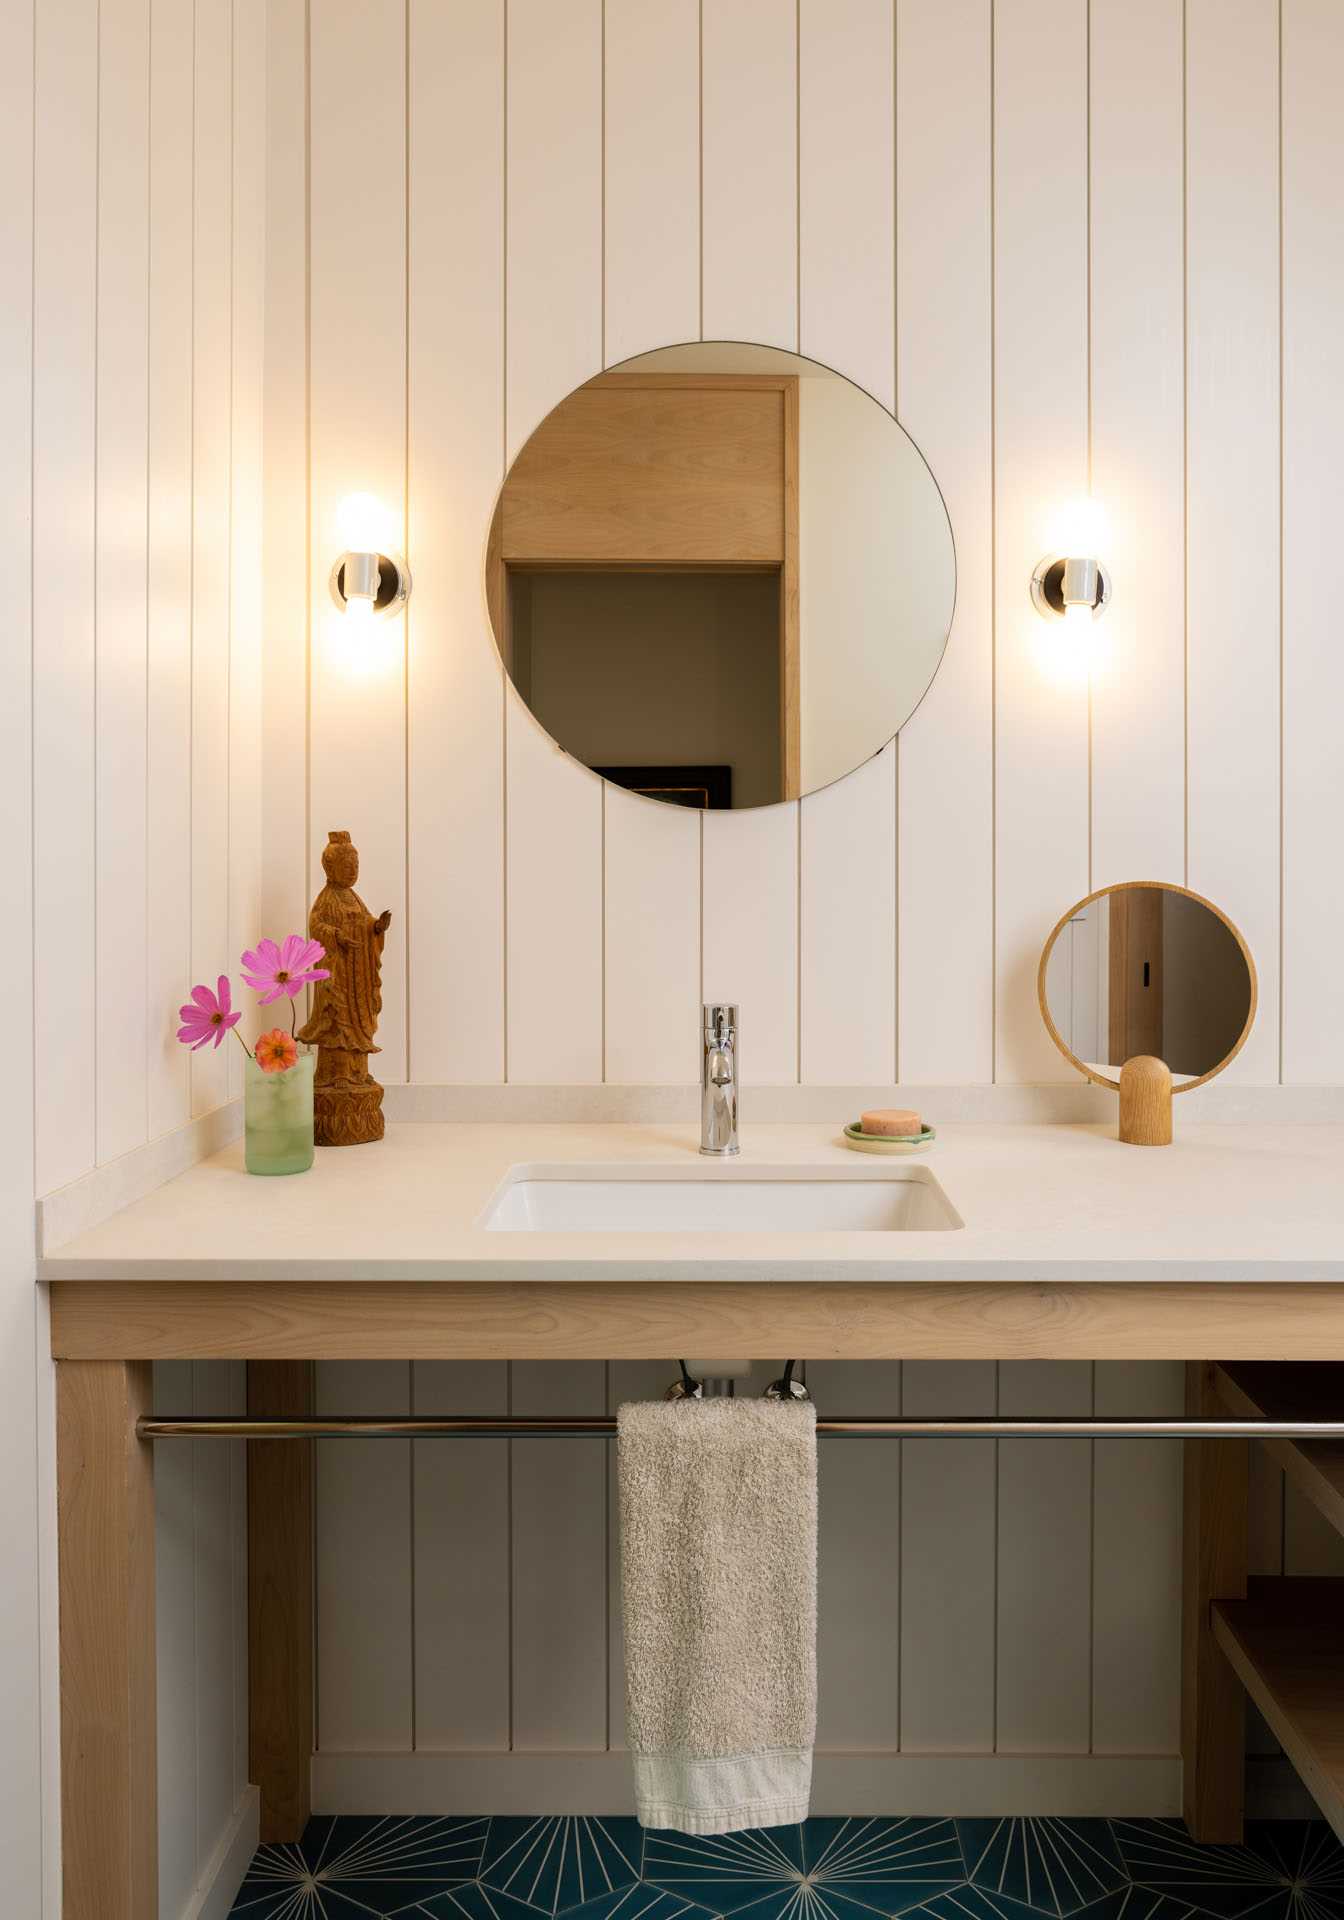 A contemporary farmhouse bathroom with a wood vanity and round mirror.